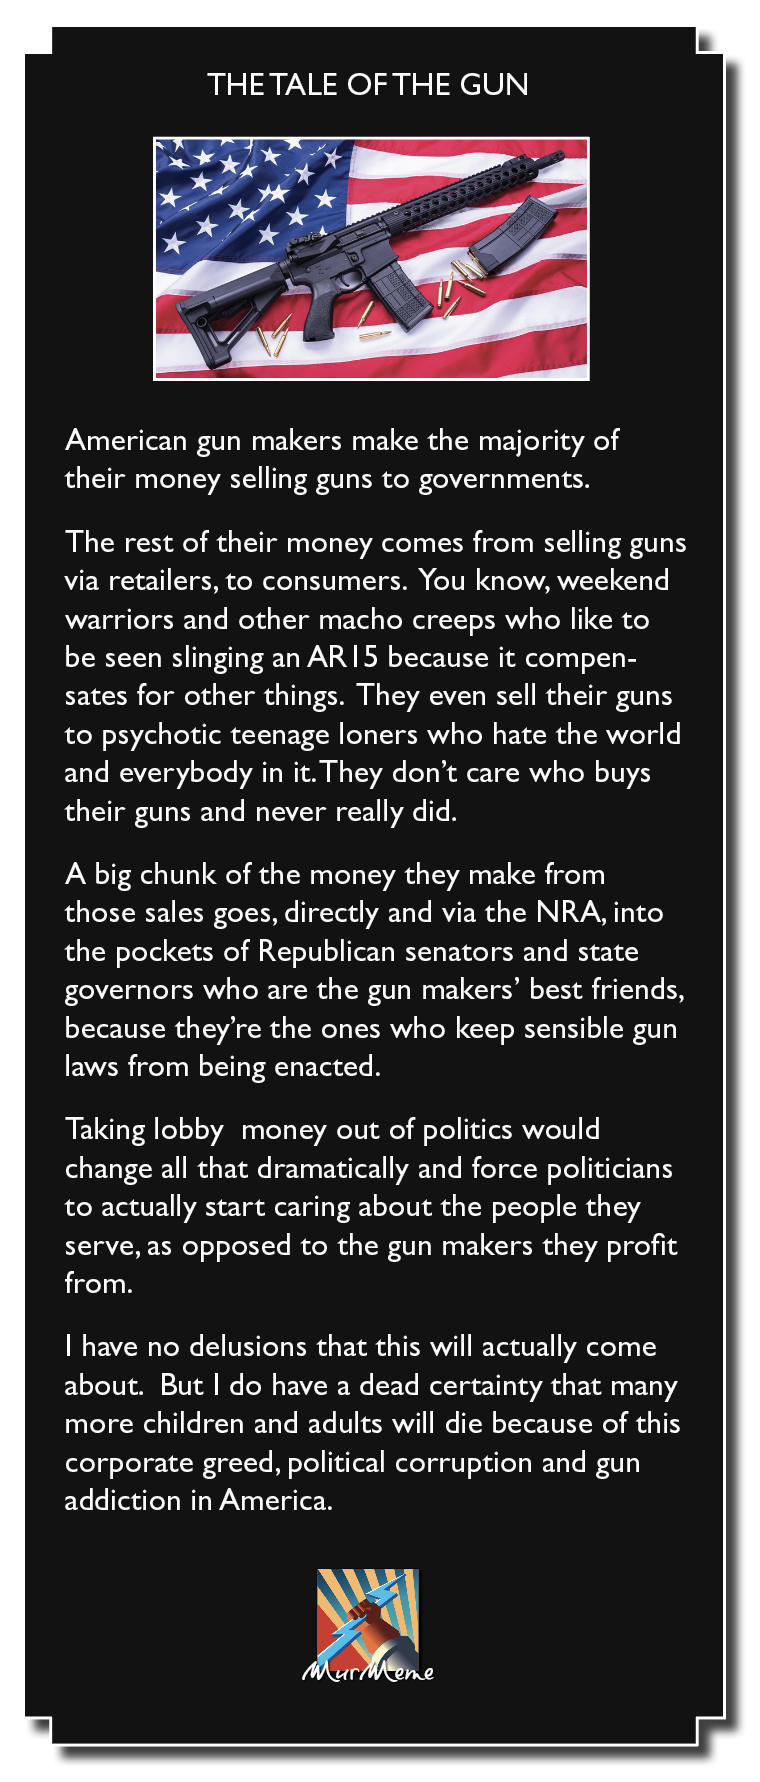 LI RNR Nolo] Ne Ul)

American gun makers make the majority of
their money selling guns to governments.

The rest of their money comes from selling guns
via retailers, to consumers. You know, weekend
warriors and other macho creeps who like to
be seen slinging an AR 5 because it compen-
sates for other things. They even sell their guns
to psychotic teenage loners who hate the world
and everybody in it. They don’t care who buys
their guns and never really did.

A big chunk of the money they make from
those sales goes, directly and via the NRA, into
the pockets of Republican senators and state
governors who are the gun makers’ best friends,
because they're the ones who keep sensible gun
laws from being enacted.

Taking lobby money out of politics would
change all that dramatically and force politicians
to actually start caring about the people they
serve, as opposed to the gun makers they profit
from.

| have no delusions that this will actually come
about. But | do have a dead certainty that many
more children and adults will die because of this
corporate greed, political corruption and gun

addiction in America.
Ml